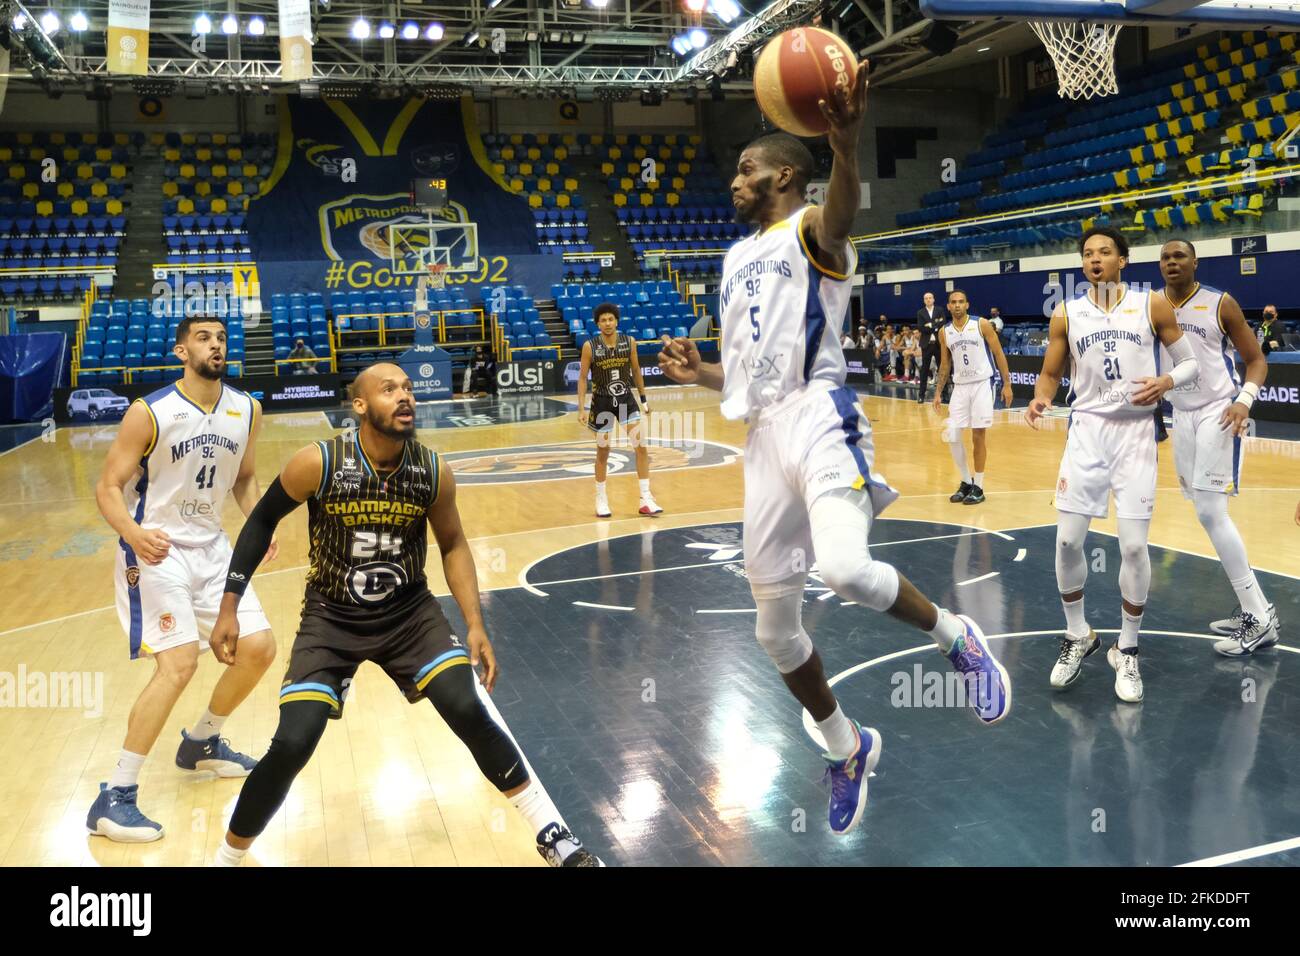 Levallois, Hauts de Seine, France. 1st May, 2021. LAHAOU KONATE shooting  guard of Boulogne-Levallois in action during the French Basketball  championship Jeep Elite between Boulogne-Levallois and Chalons-Reims at  Marcel Cerdan stadium -